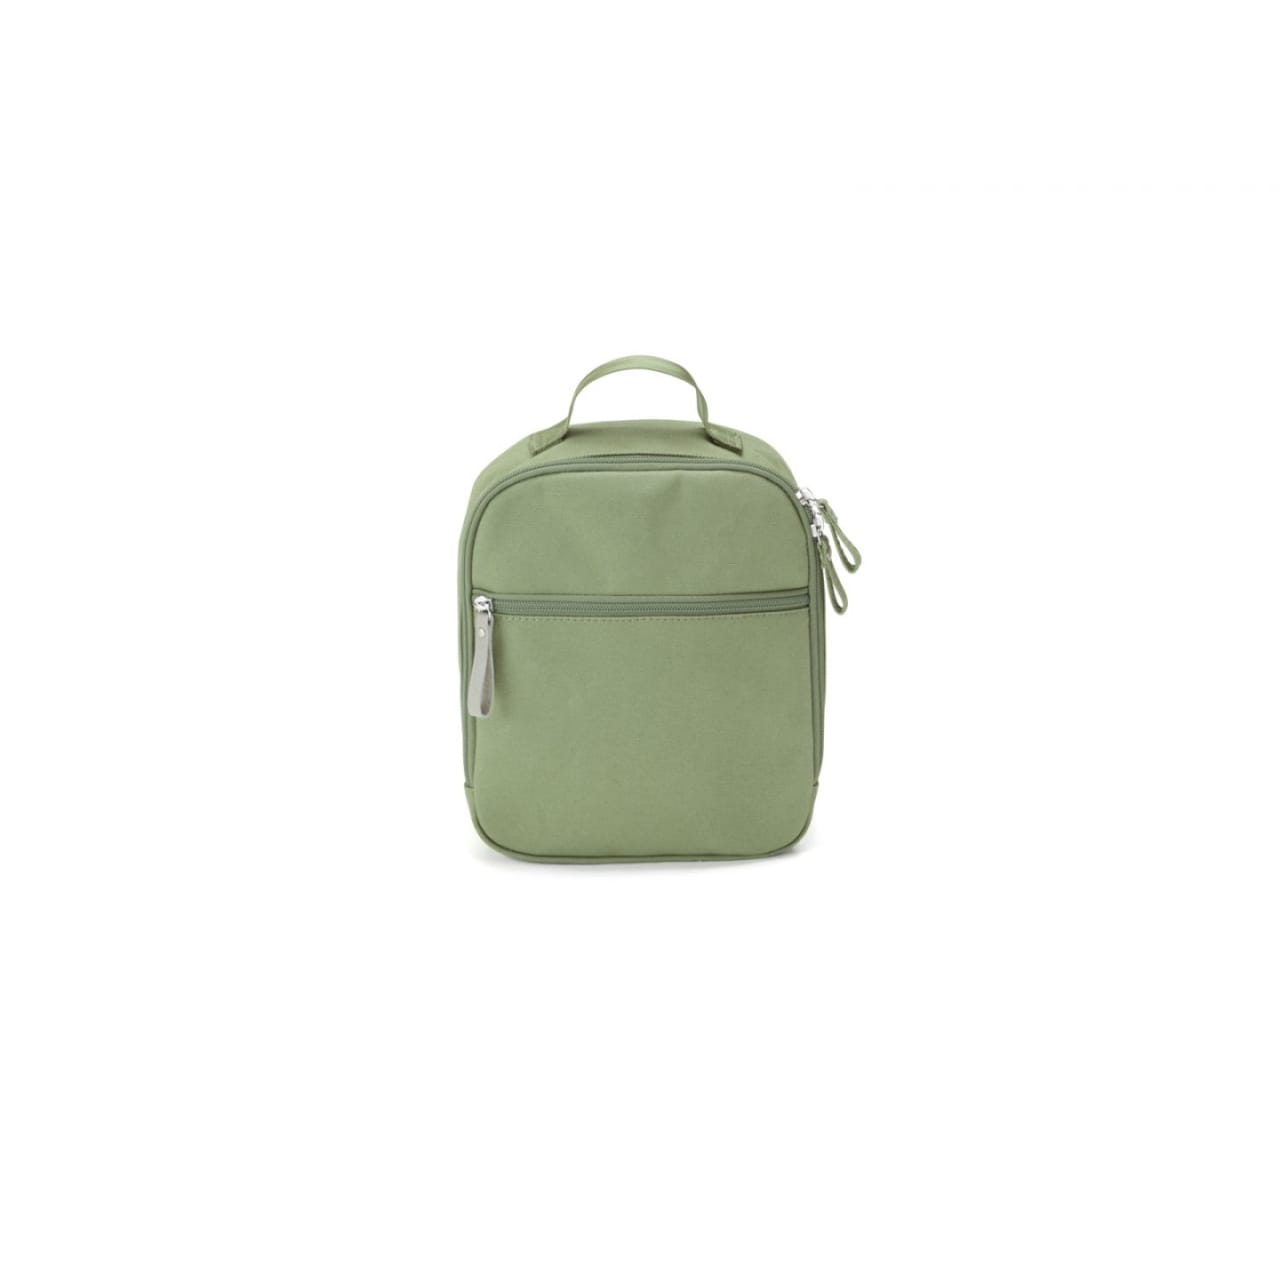 Moss green canvas compact backpack with double top zipper, zipper front pouch, and matching carry handle and backpack straps.